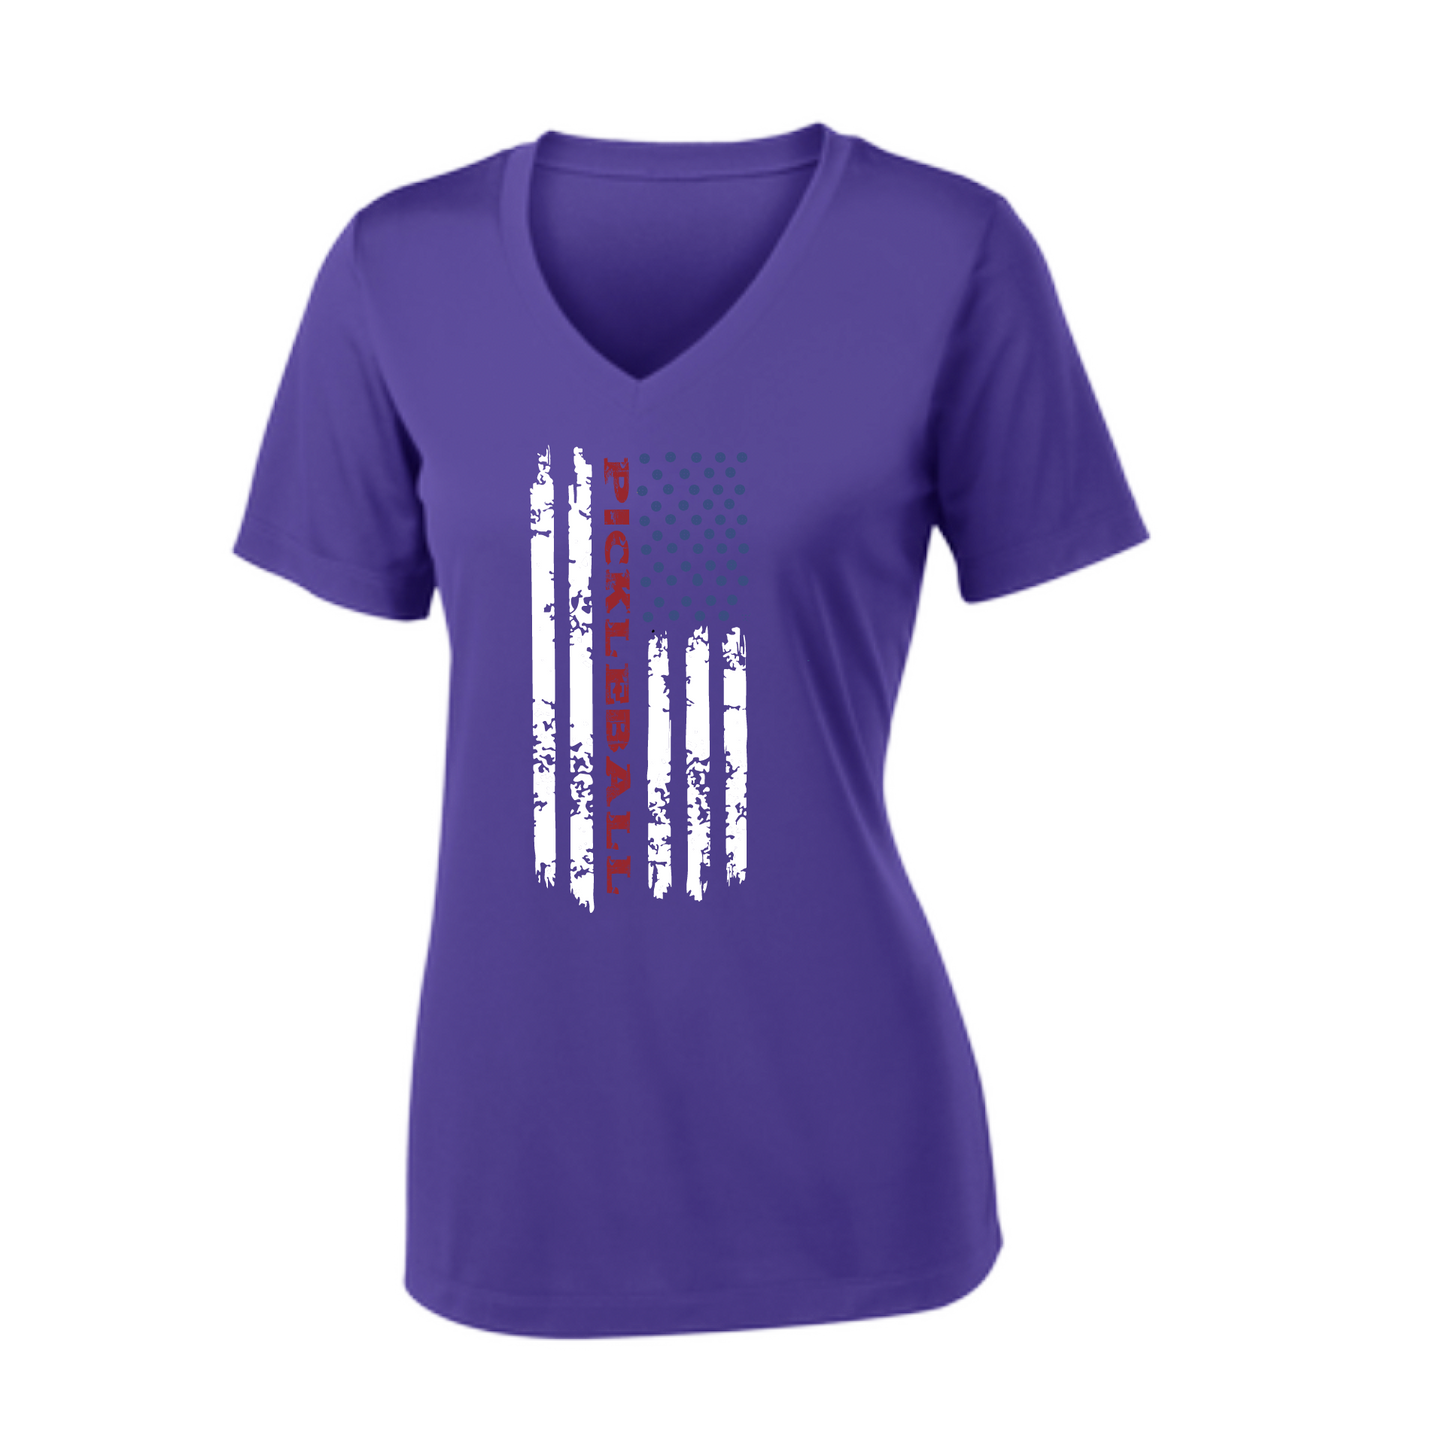 Pickleball Design: Pickleball Flag Vertical on Front or Back of Shirt  Women's Style: Short-Sleeve V-Neck  Turn up the volume in this Women's shirt with its perfect mix of softness and attitude. Material is ultra-comfortable with moisture wicking properties and tri-blend softness. PosiCharge technology locks in color. Highly breathable and lightweight.